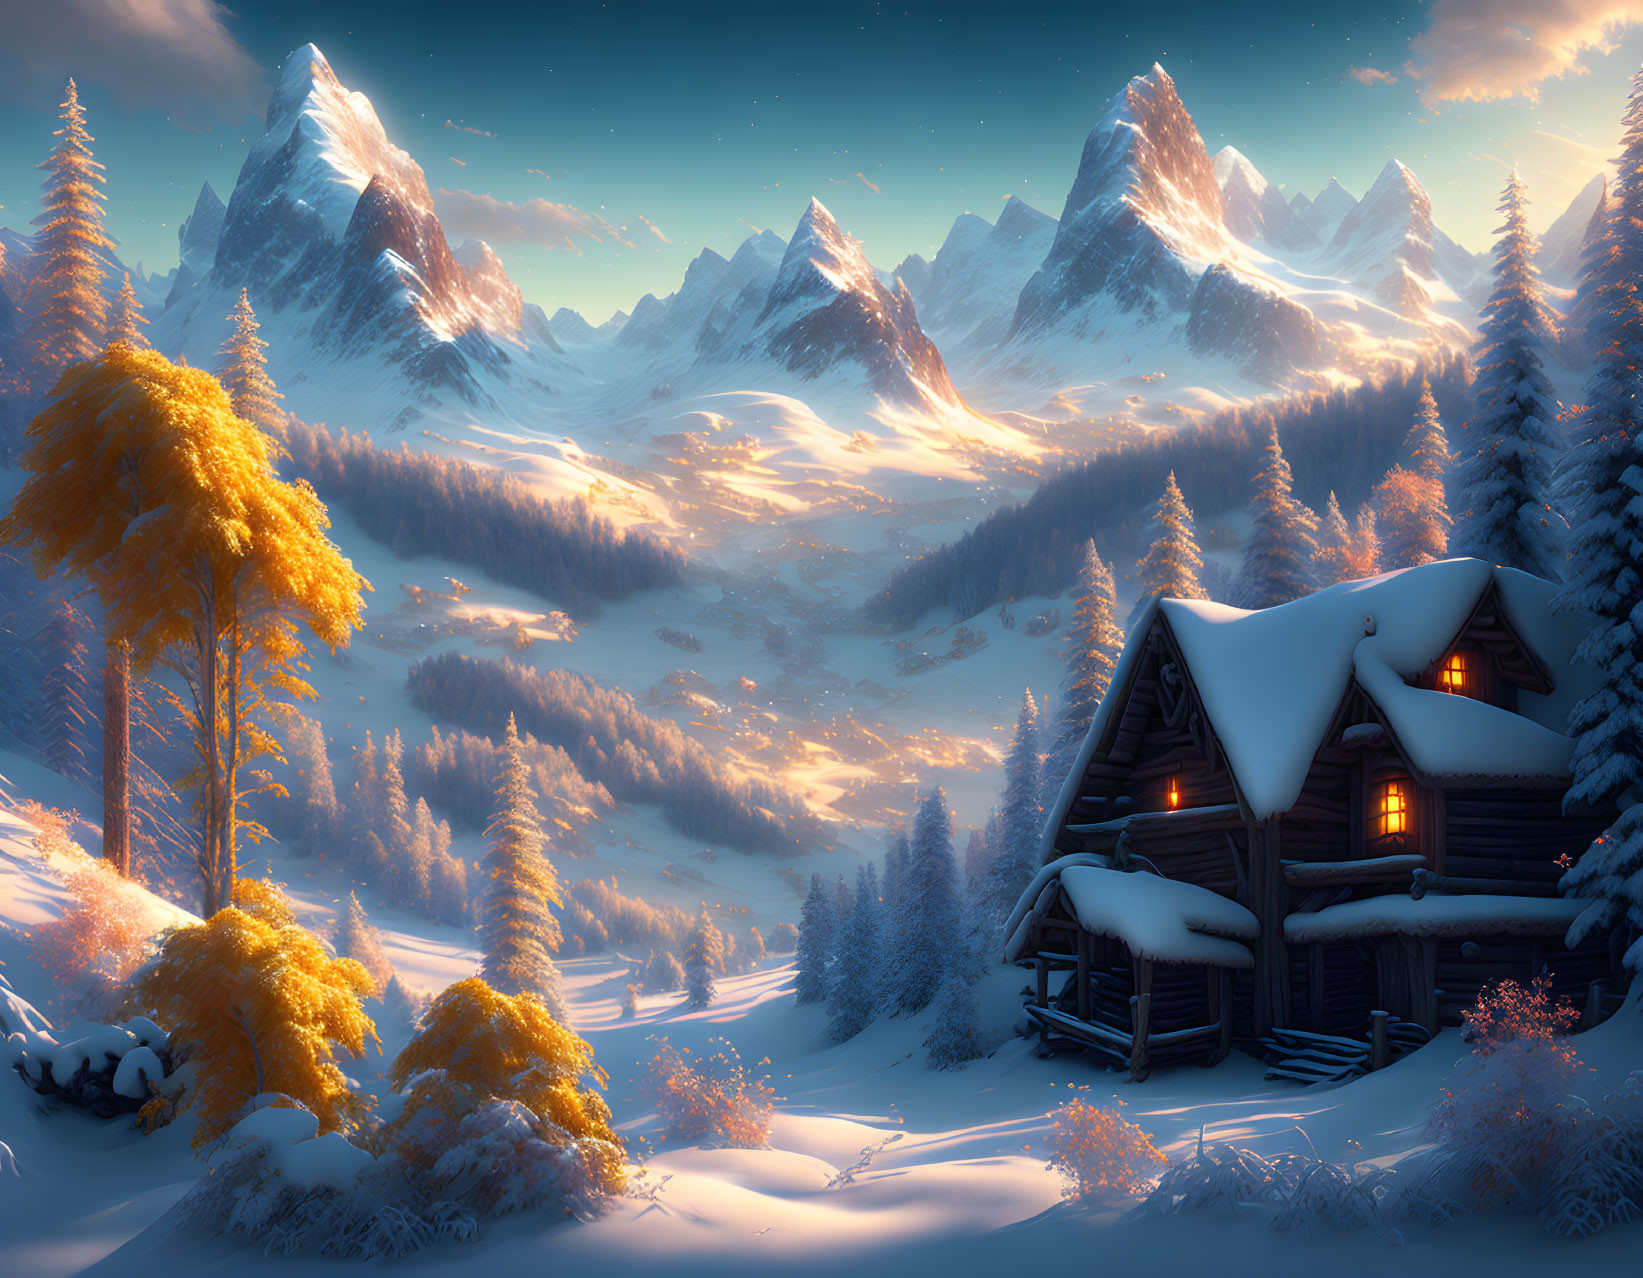 Snow-covered winter landscape with cozy cabin and illuminated windows